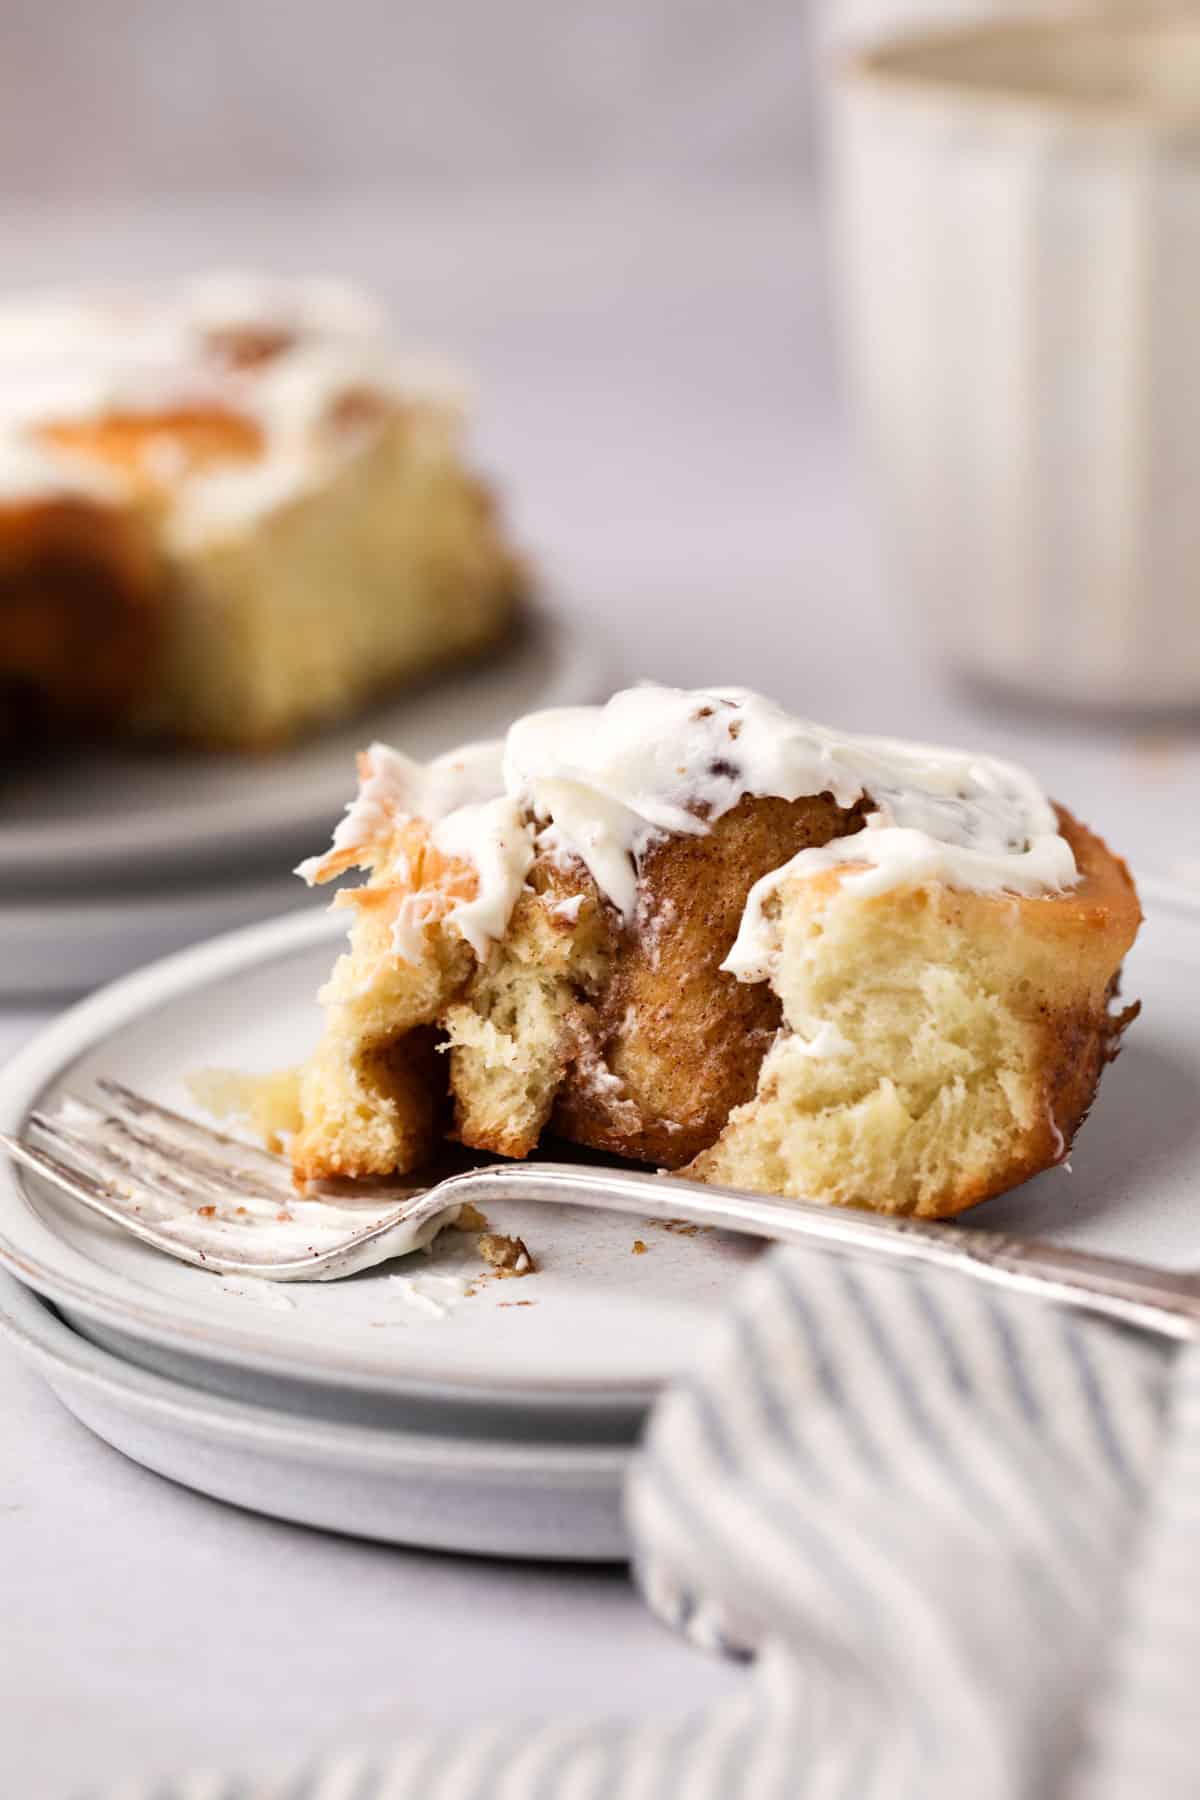 Close up of a homemade soft and fluffy cinnamon roll with cream cheese frosting set in plate with a fork and a bite taken out of it.